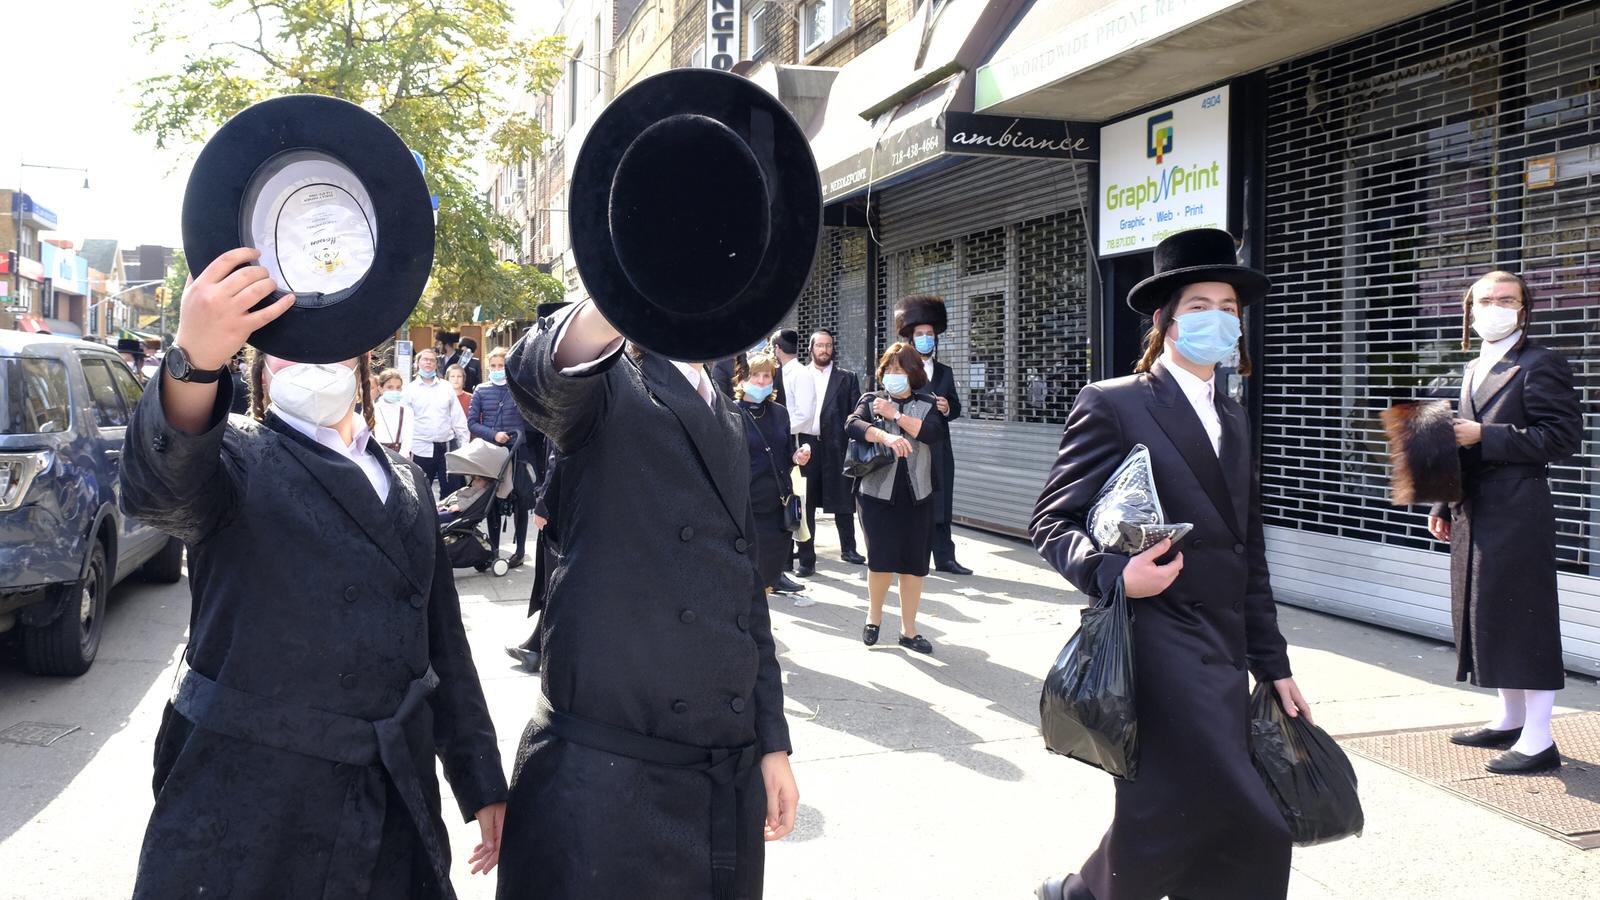 Image from Photojournalism - Brooklyn - October 7, 2020 - A group of Orthodox Jewish...